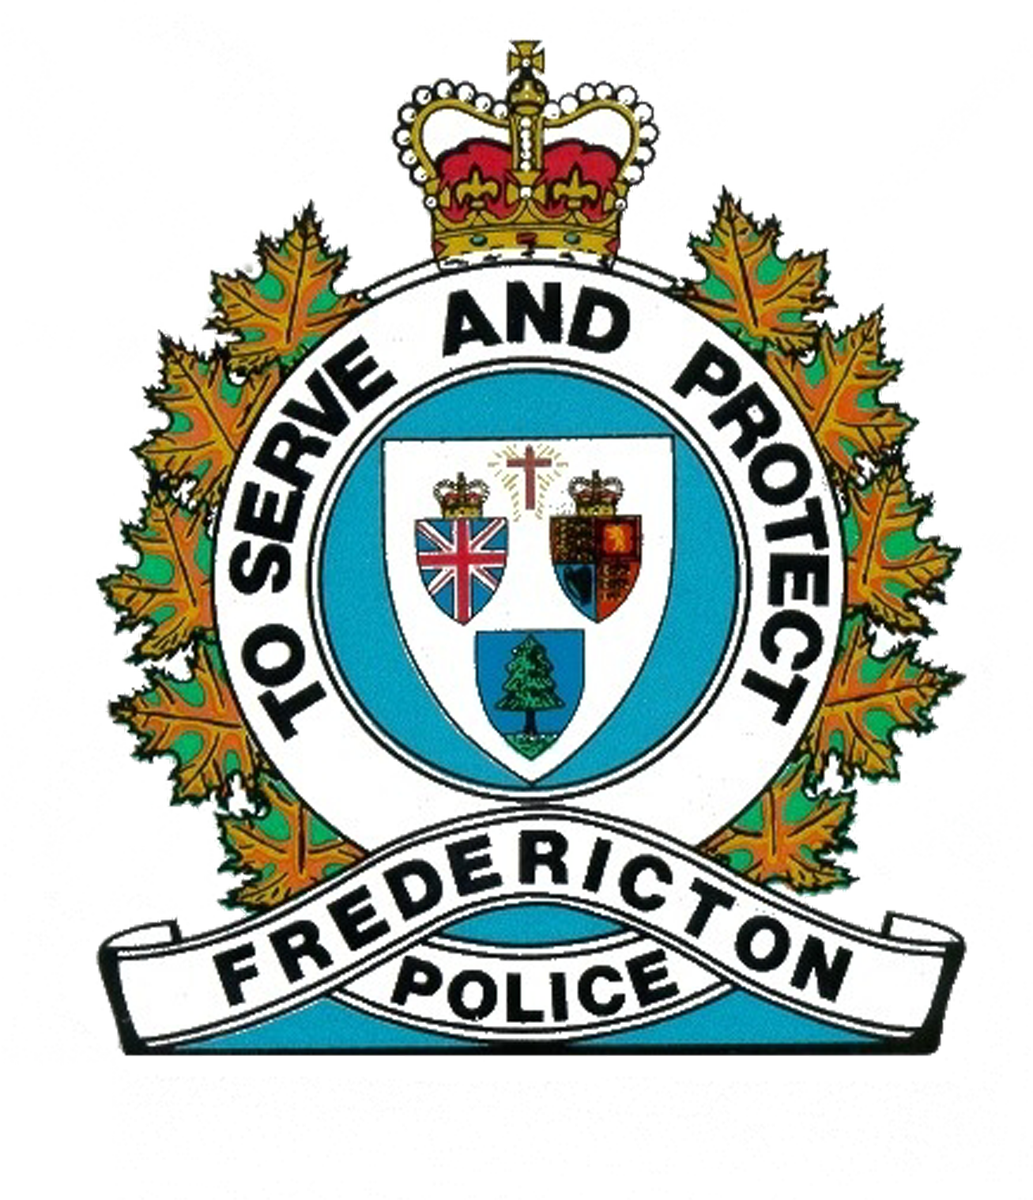 Fredericton Police On Twitter - Crest (1033x1200)